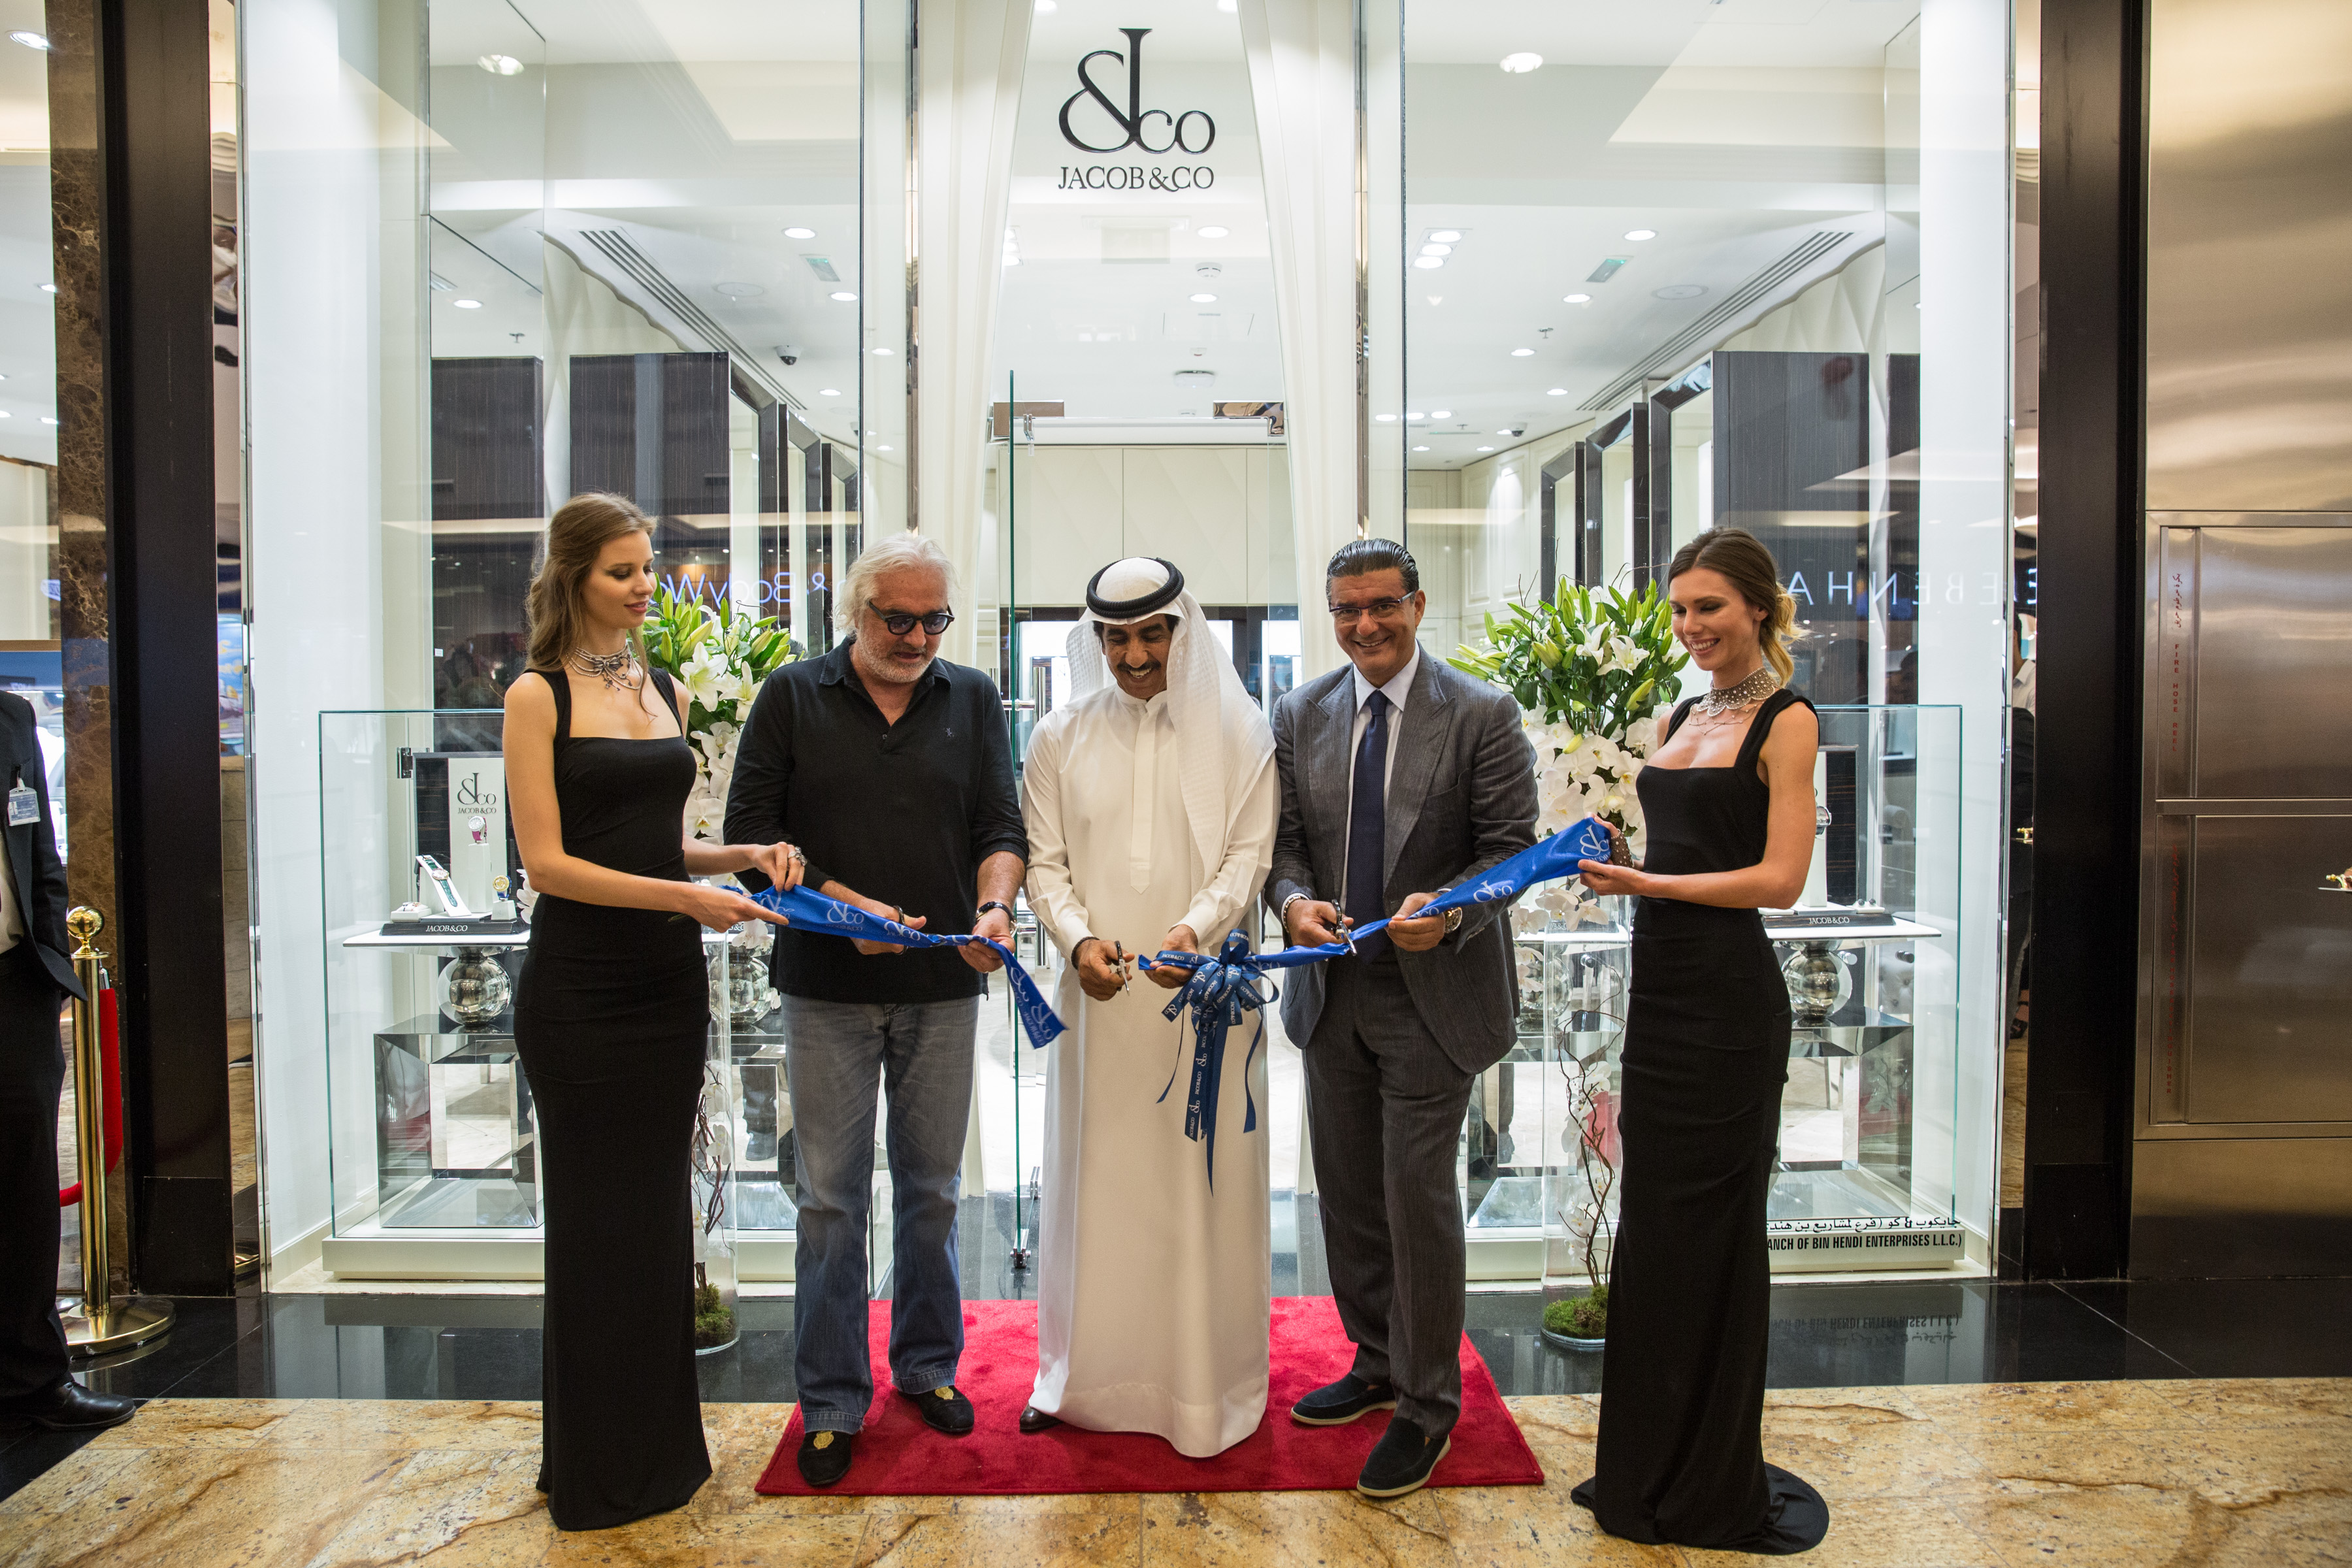 Jacob & Co. Celebrates the Grand Opening of its Dubai Boutique with Glitter and Glow